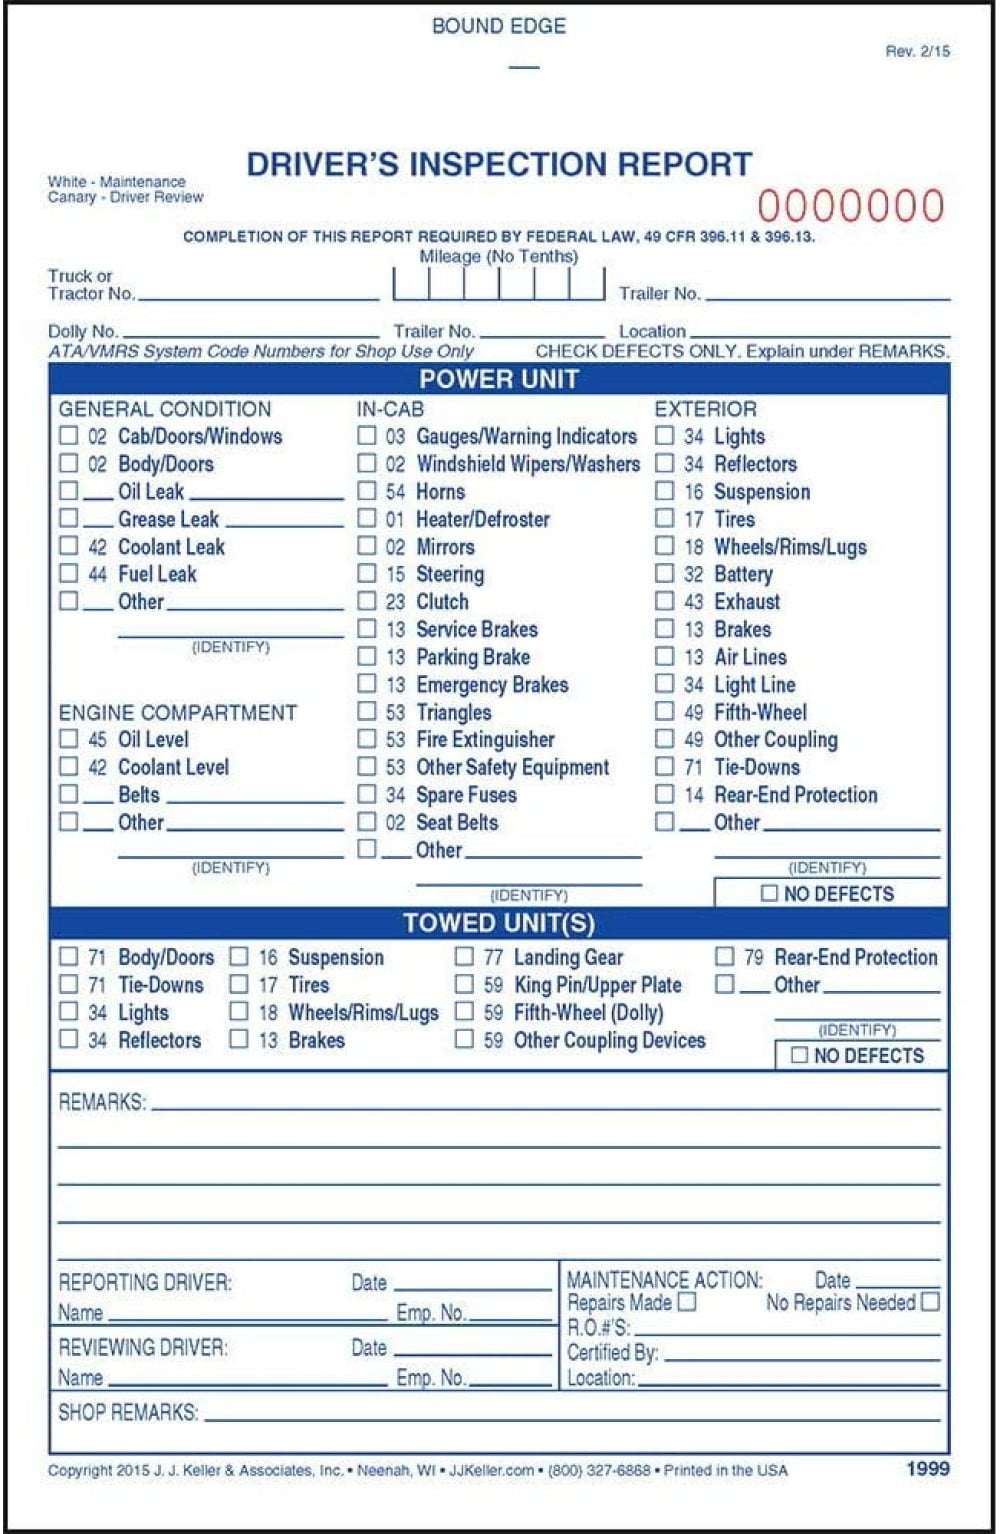 2-Ply Carbonless Keller & Associates J Red Ink 31 Sets of Forms Per DVIR Book Meet FMCSR Requirements Refuse Truck Drivers Vehicle Inspection Report 10-pk 8.5 x 11 - Book Format J 